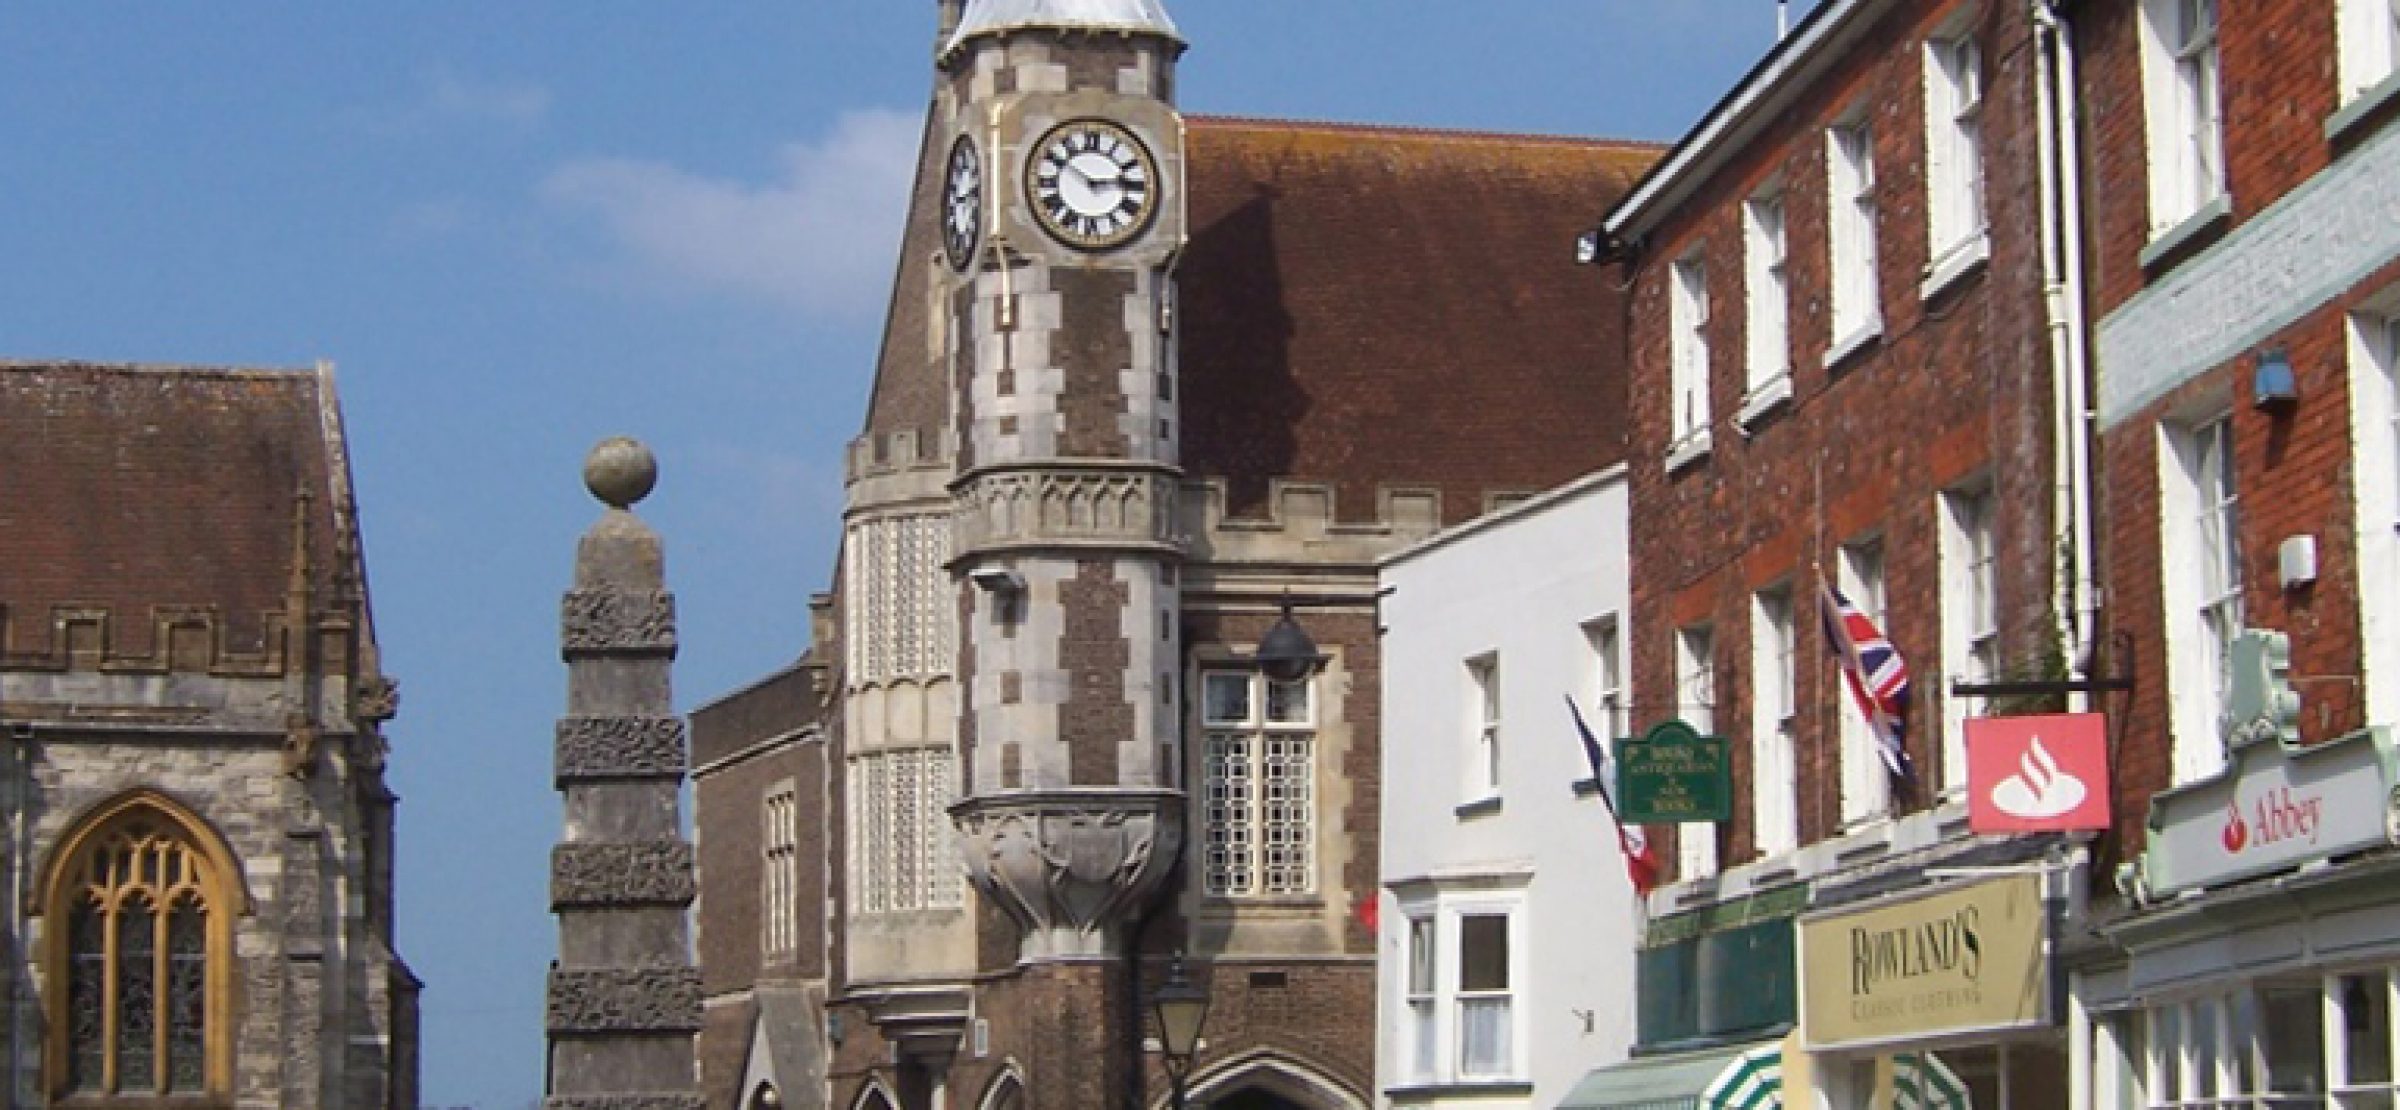 Town Pump and Corn Exchange